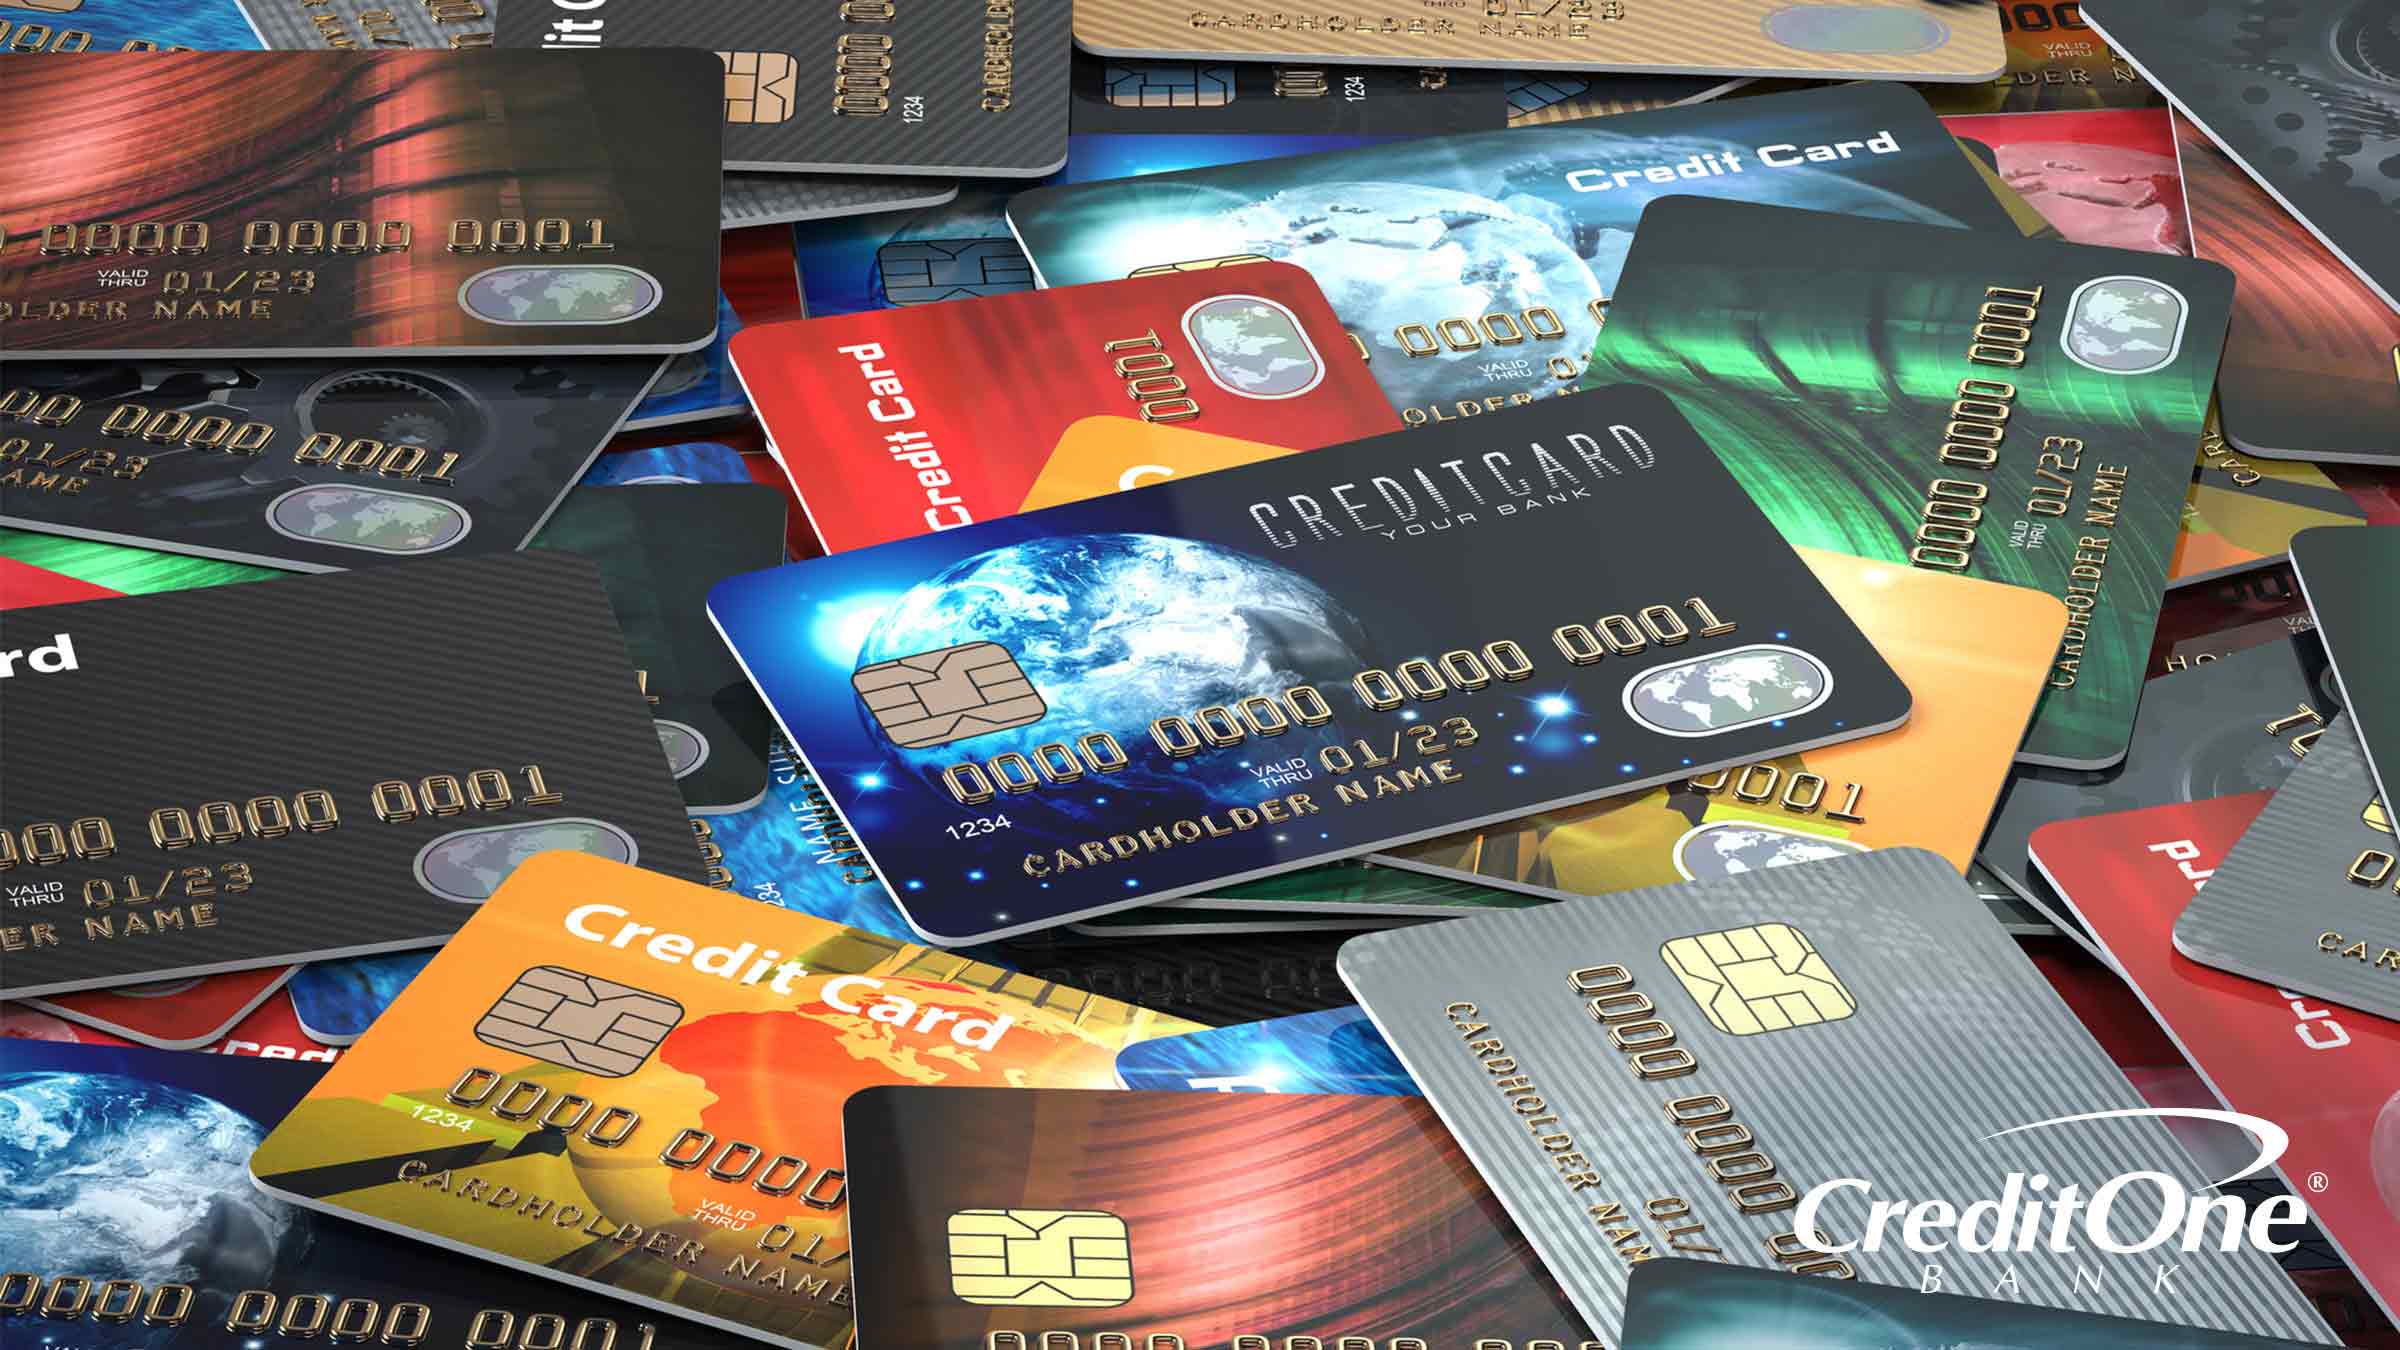 Is there such a thing as having too many credit cards?